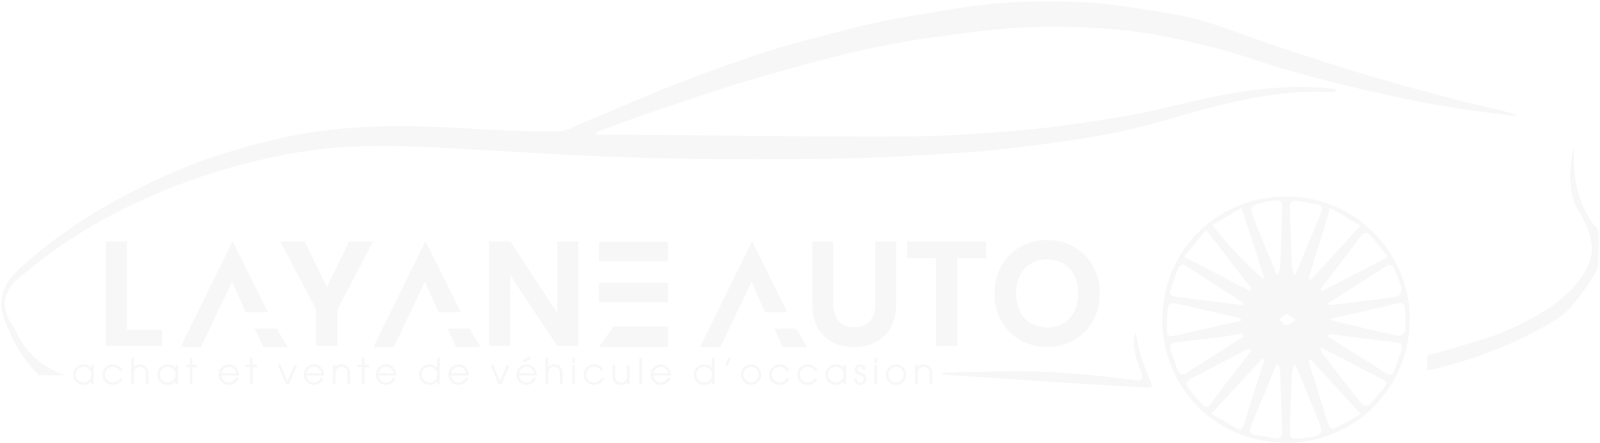 layaneauto.fr